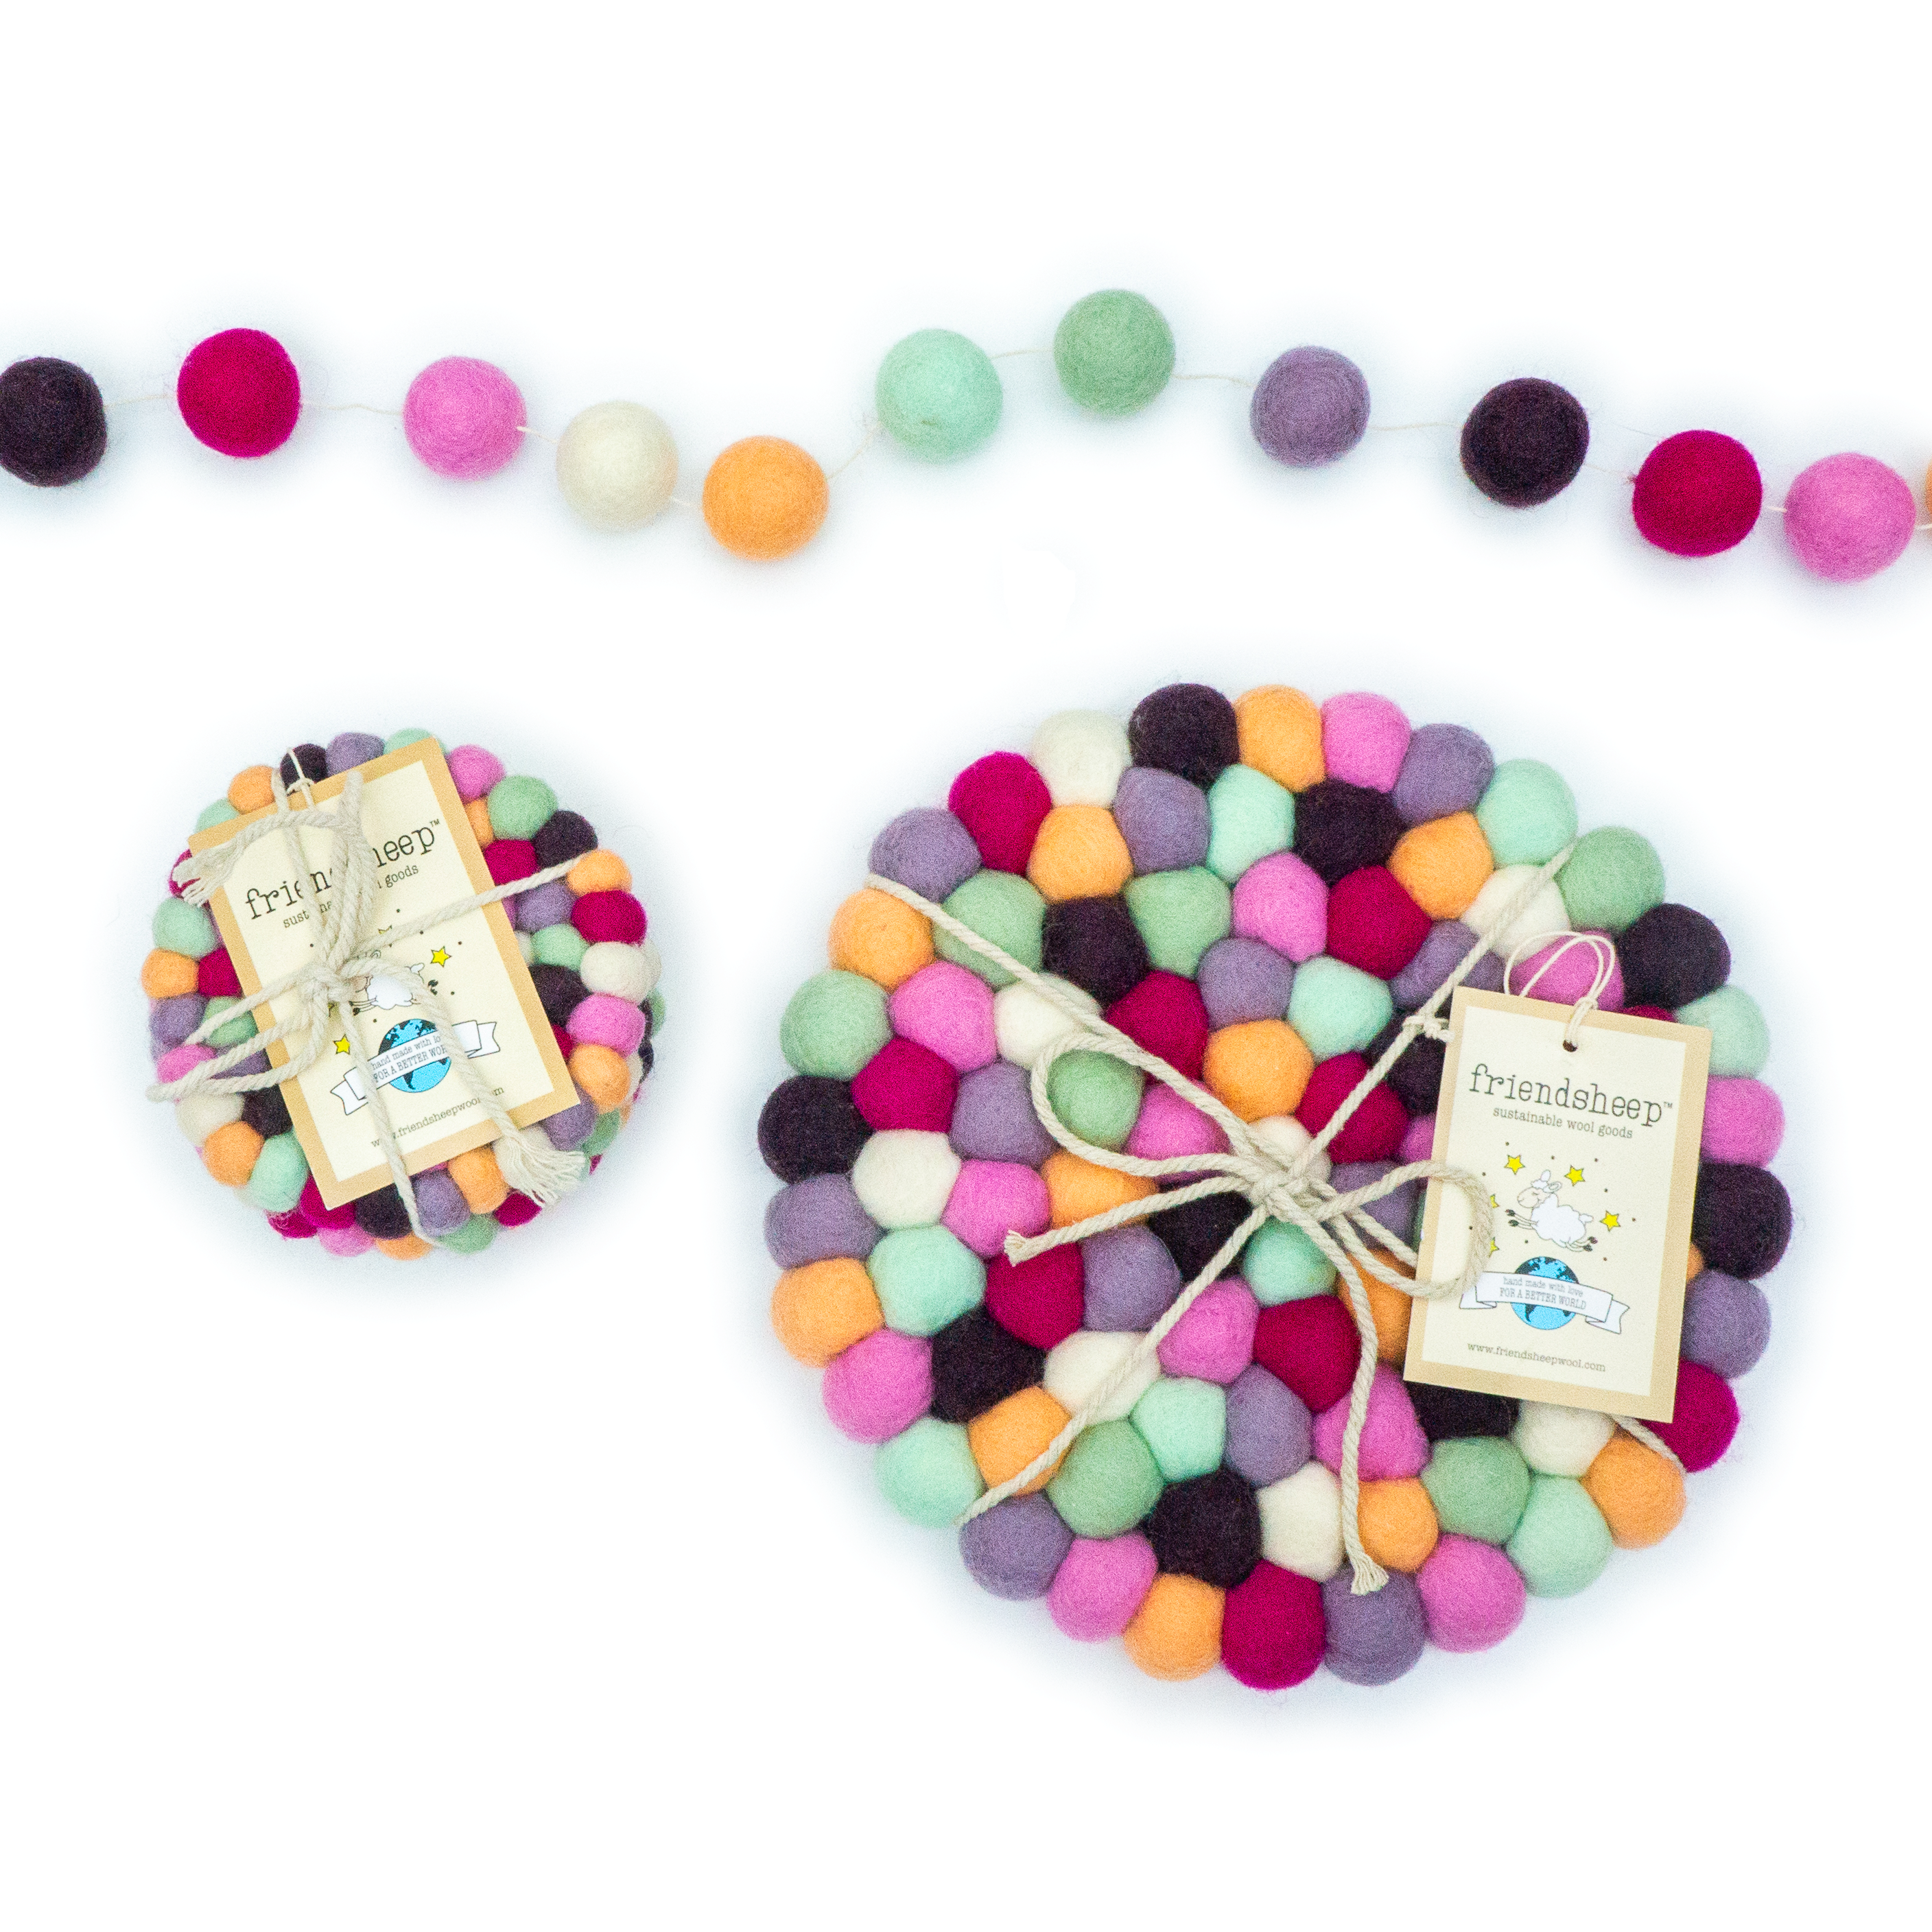 Macarons Eco Garlands/Ornaments: S - 24 beads/8ft (1" beads)